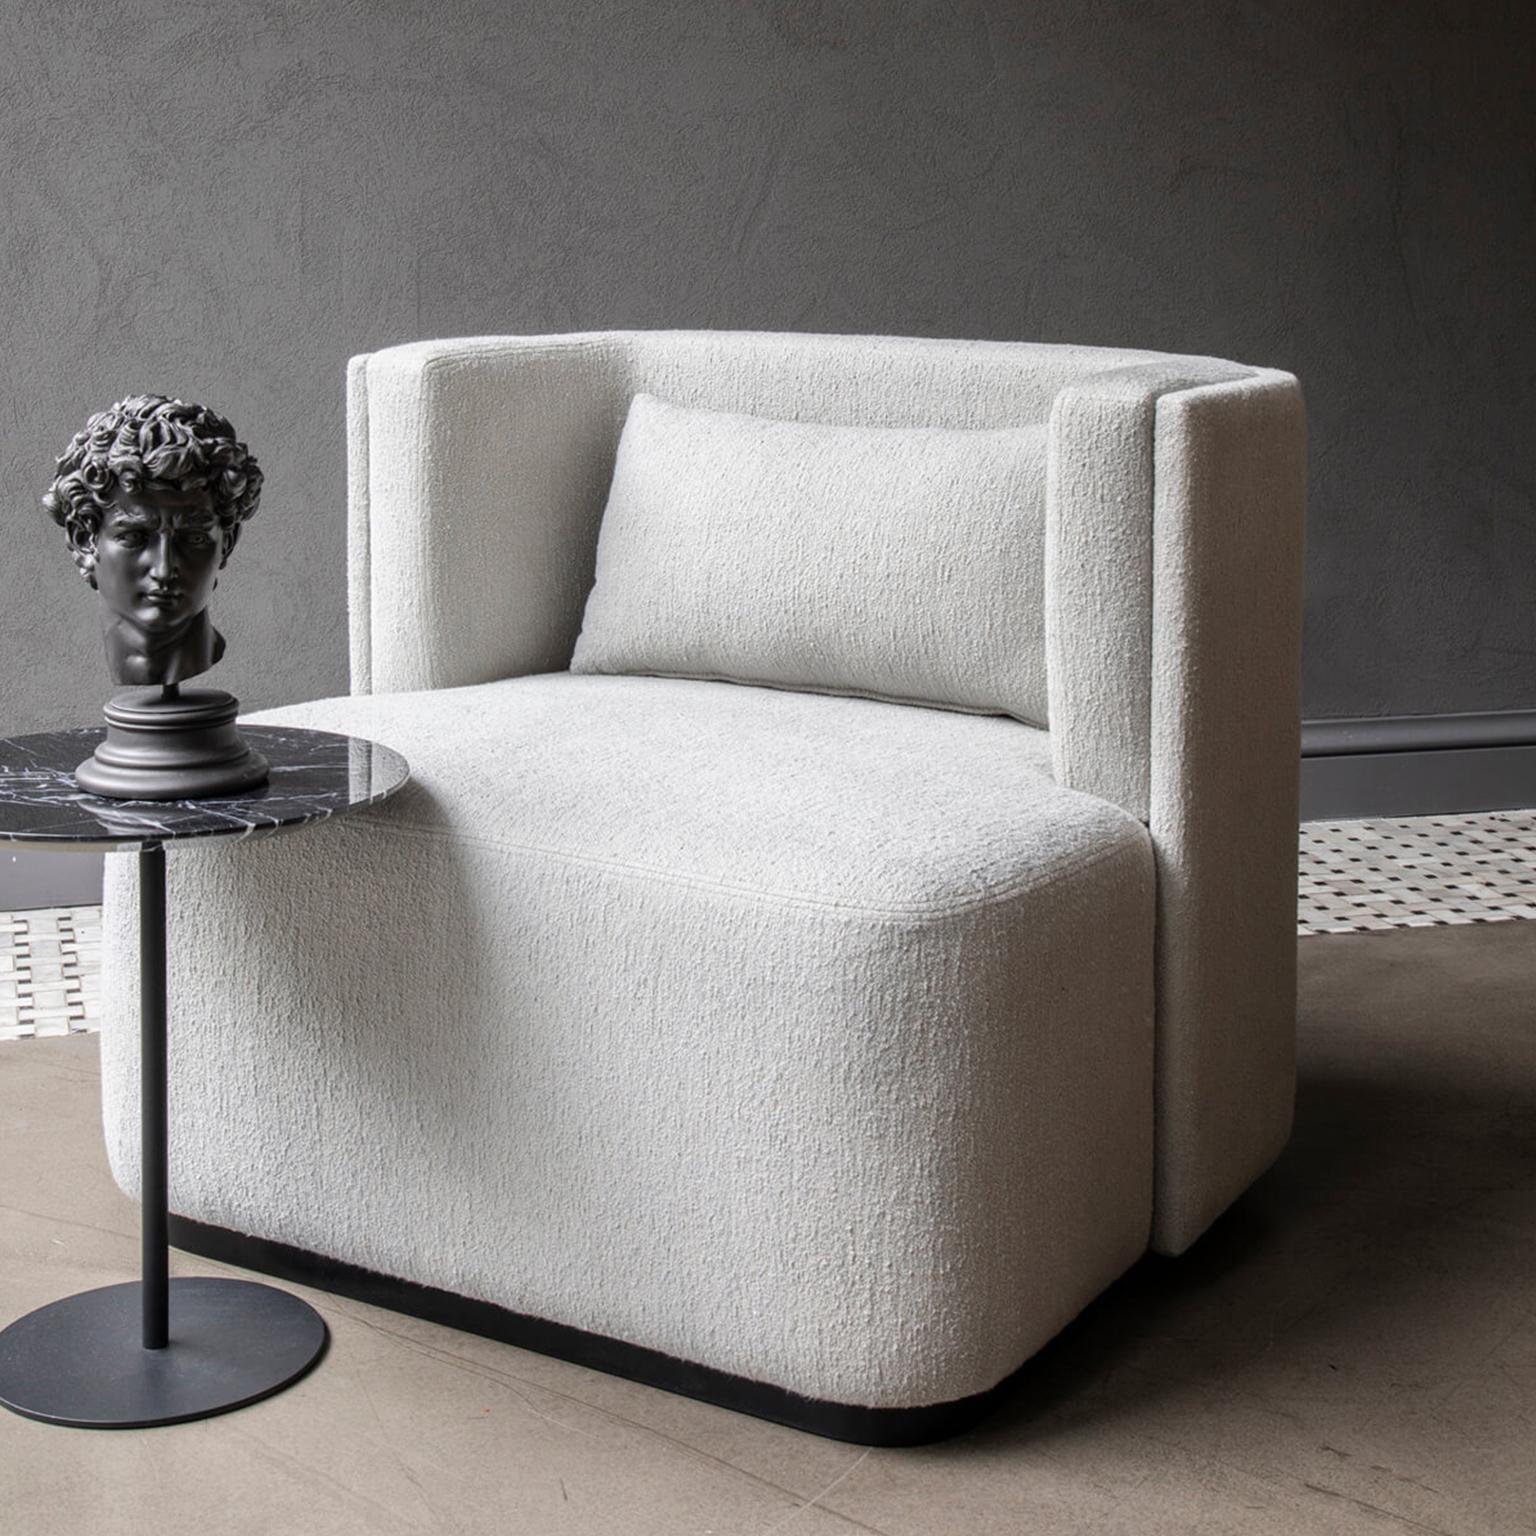 The papillonne swivel armchair complements your style with its flawless form and unmatched comfort, adding a unique character to your space.

Standing out in every field with its eye-catching modern design approach and material variety, the